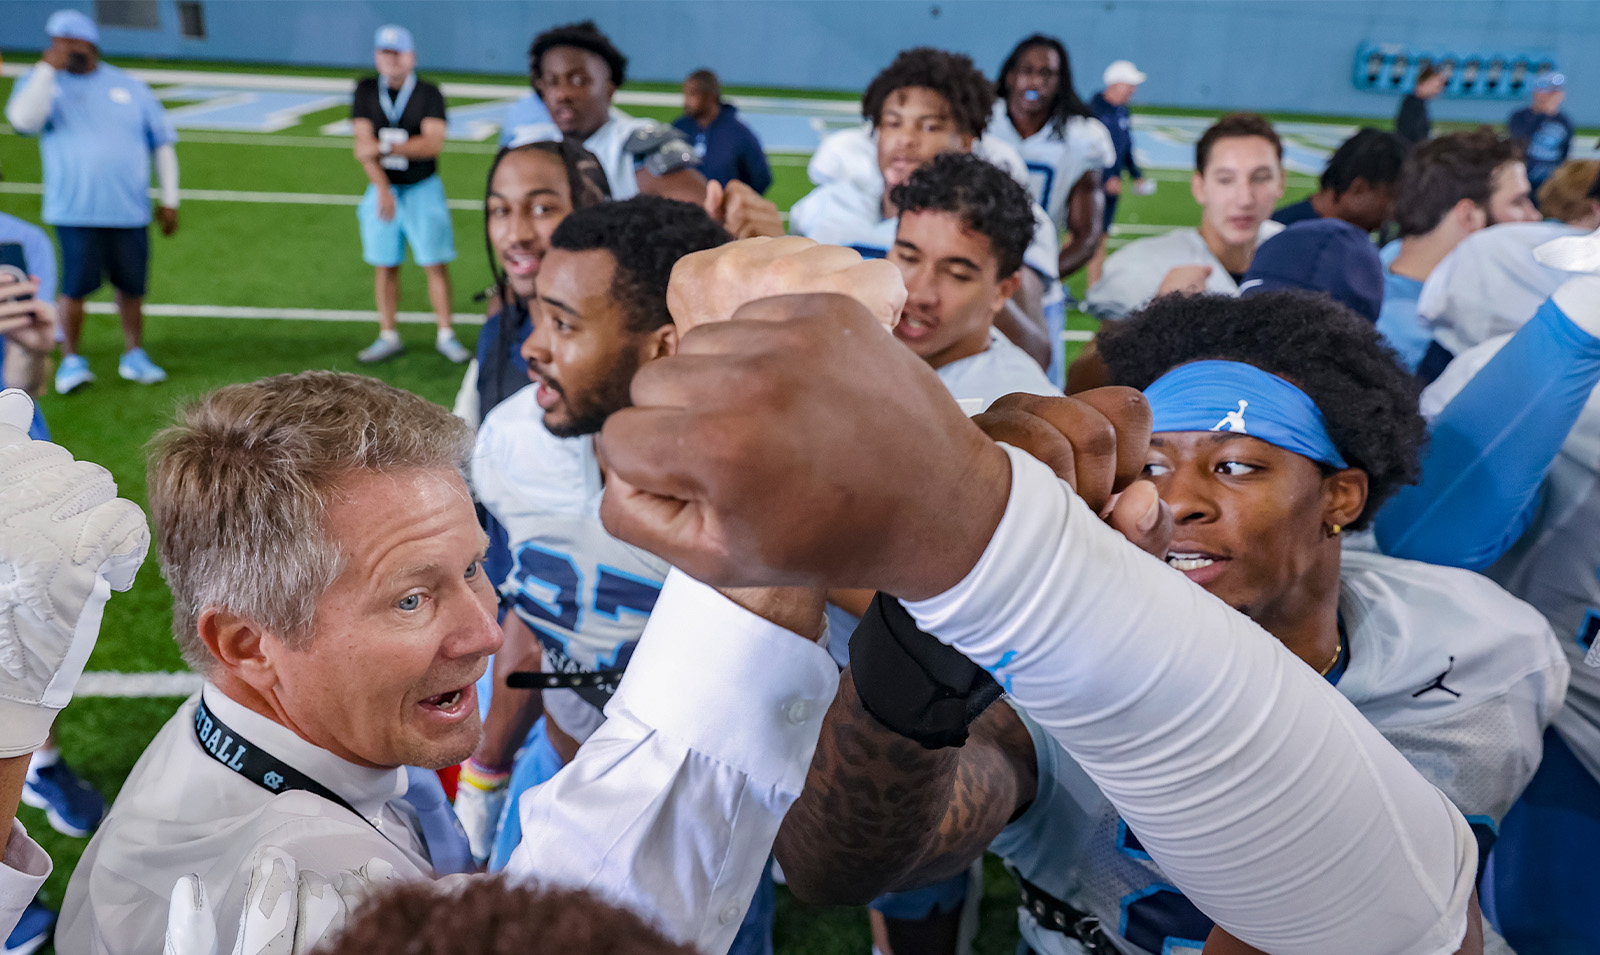 Chancellor Kevin M. Guskiewicz leading a huddle and chant with Carolina football players at one of their practices.